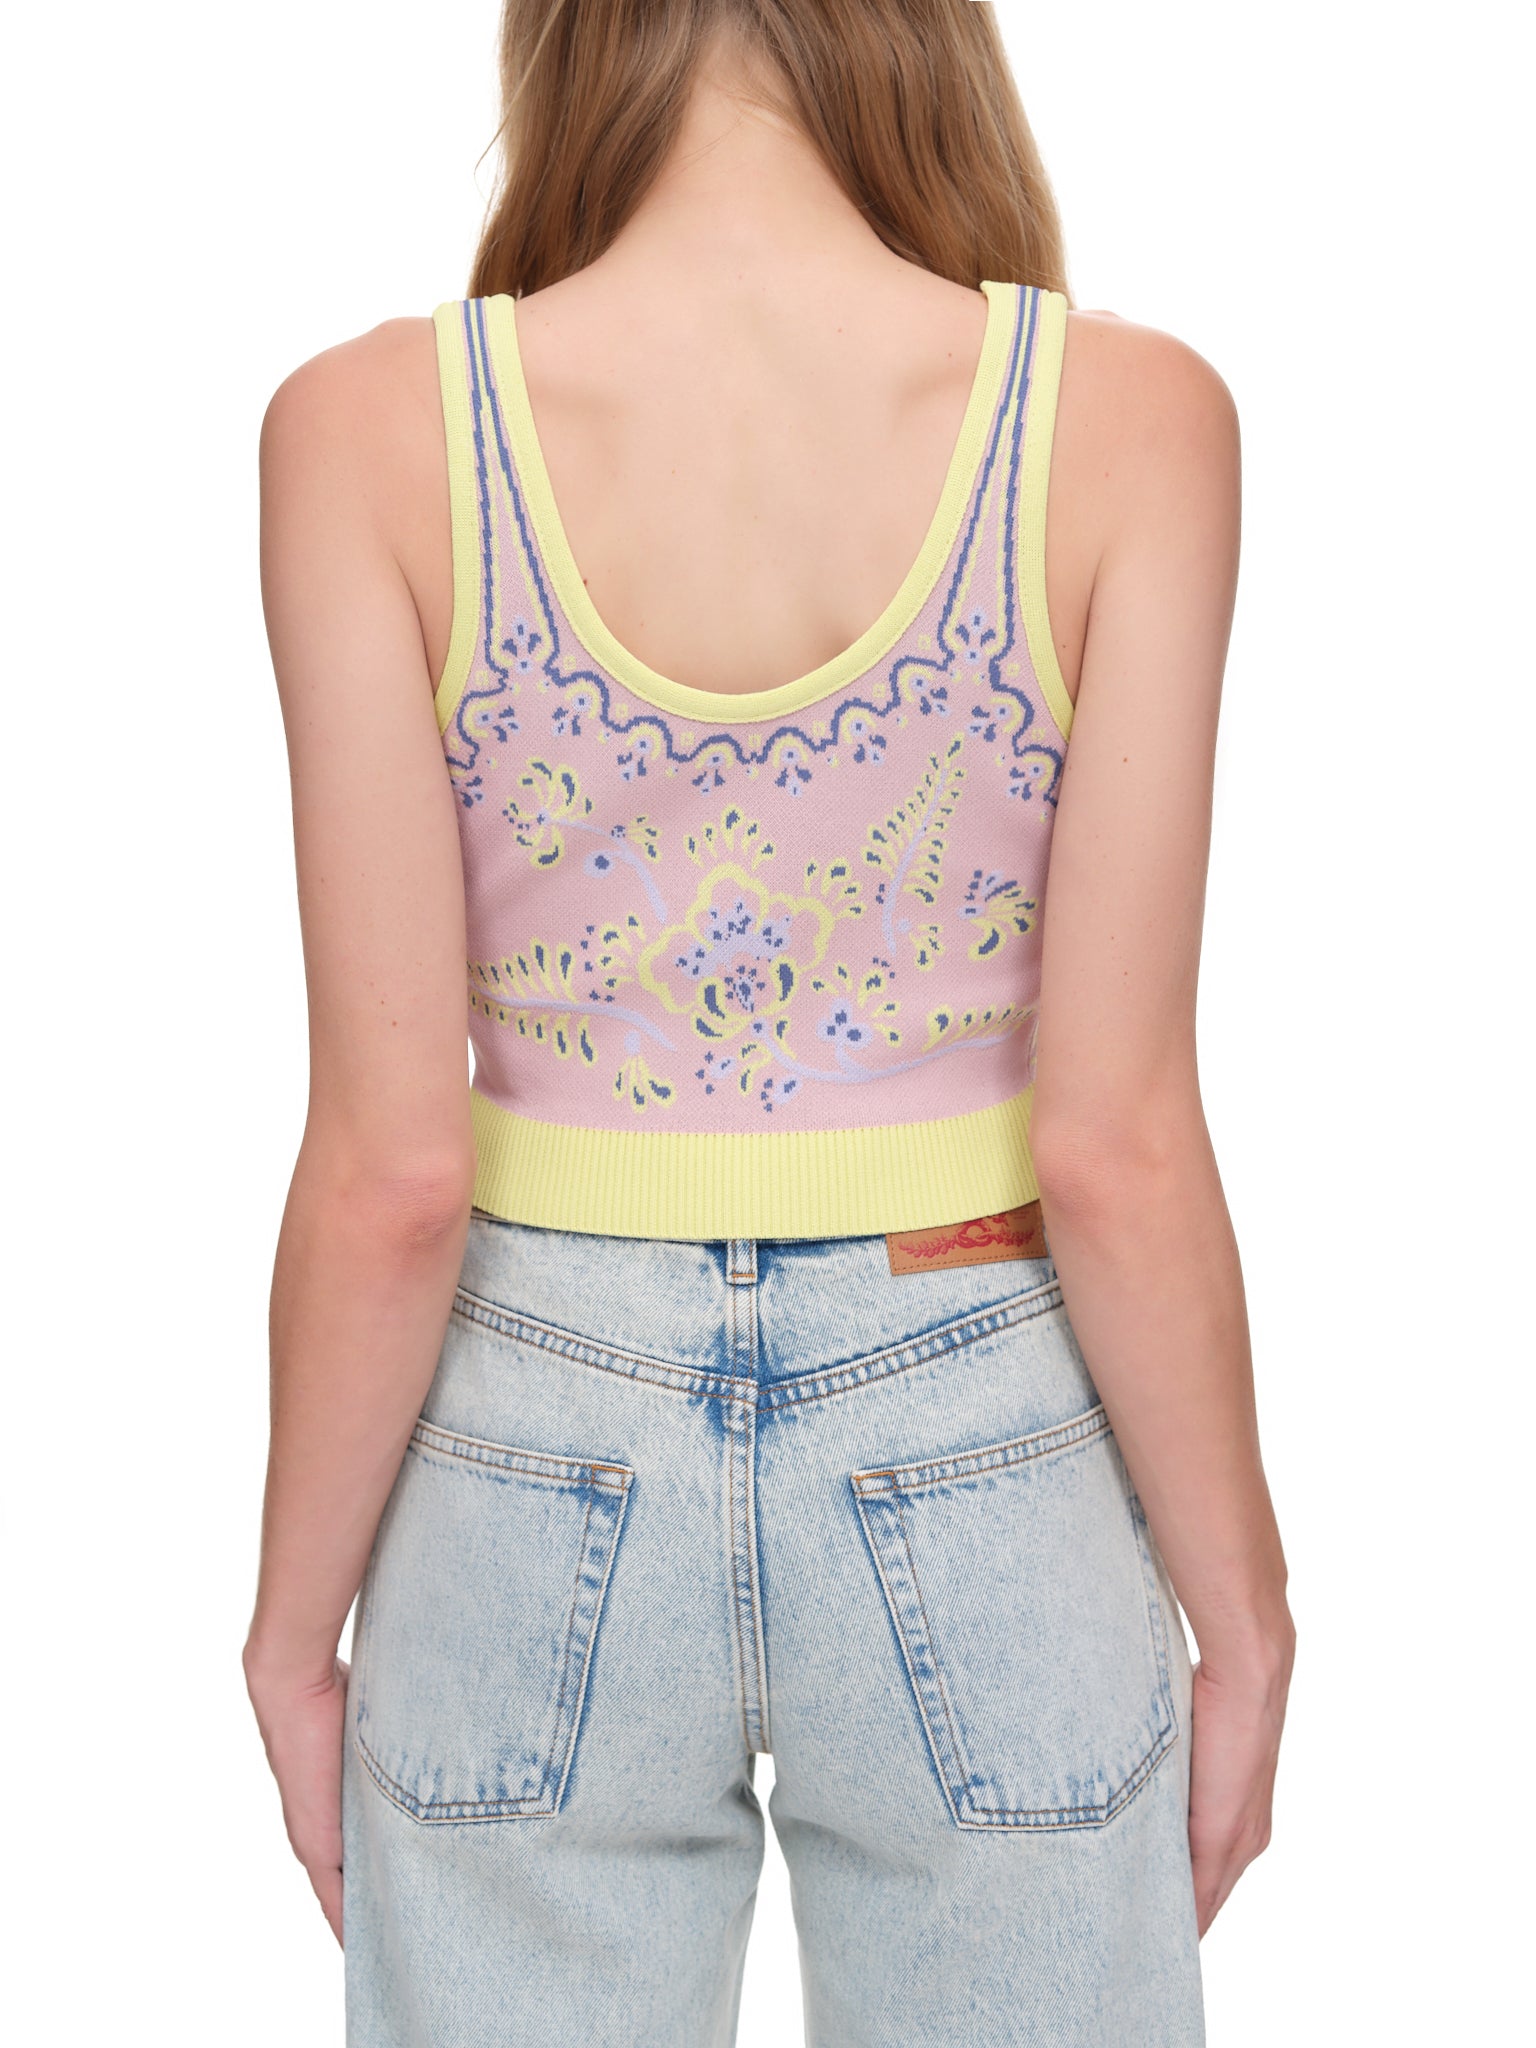 Jacquard Top (WMBRA2-Y41-PINK-YELLOW)